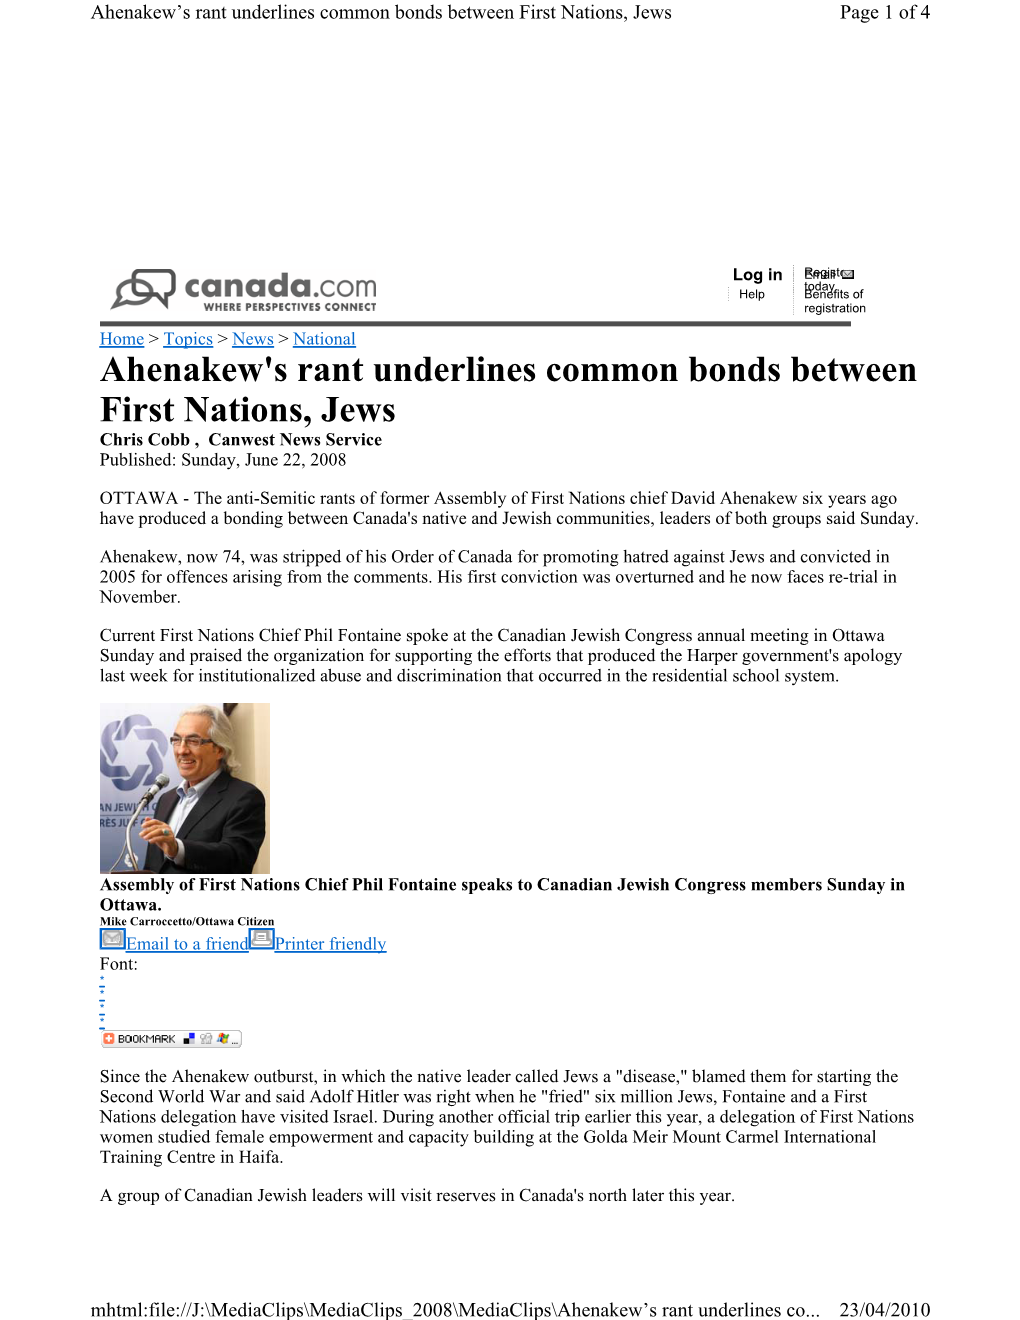 Ahenakew's Rant Underlines Common Bonds Between First Nations, Jews Chris Cobb , Canwest News Service Published: Sunday, June 22, 2008